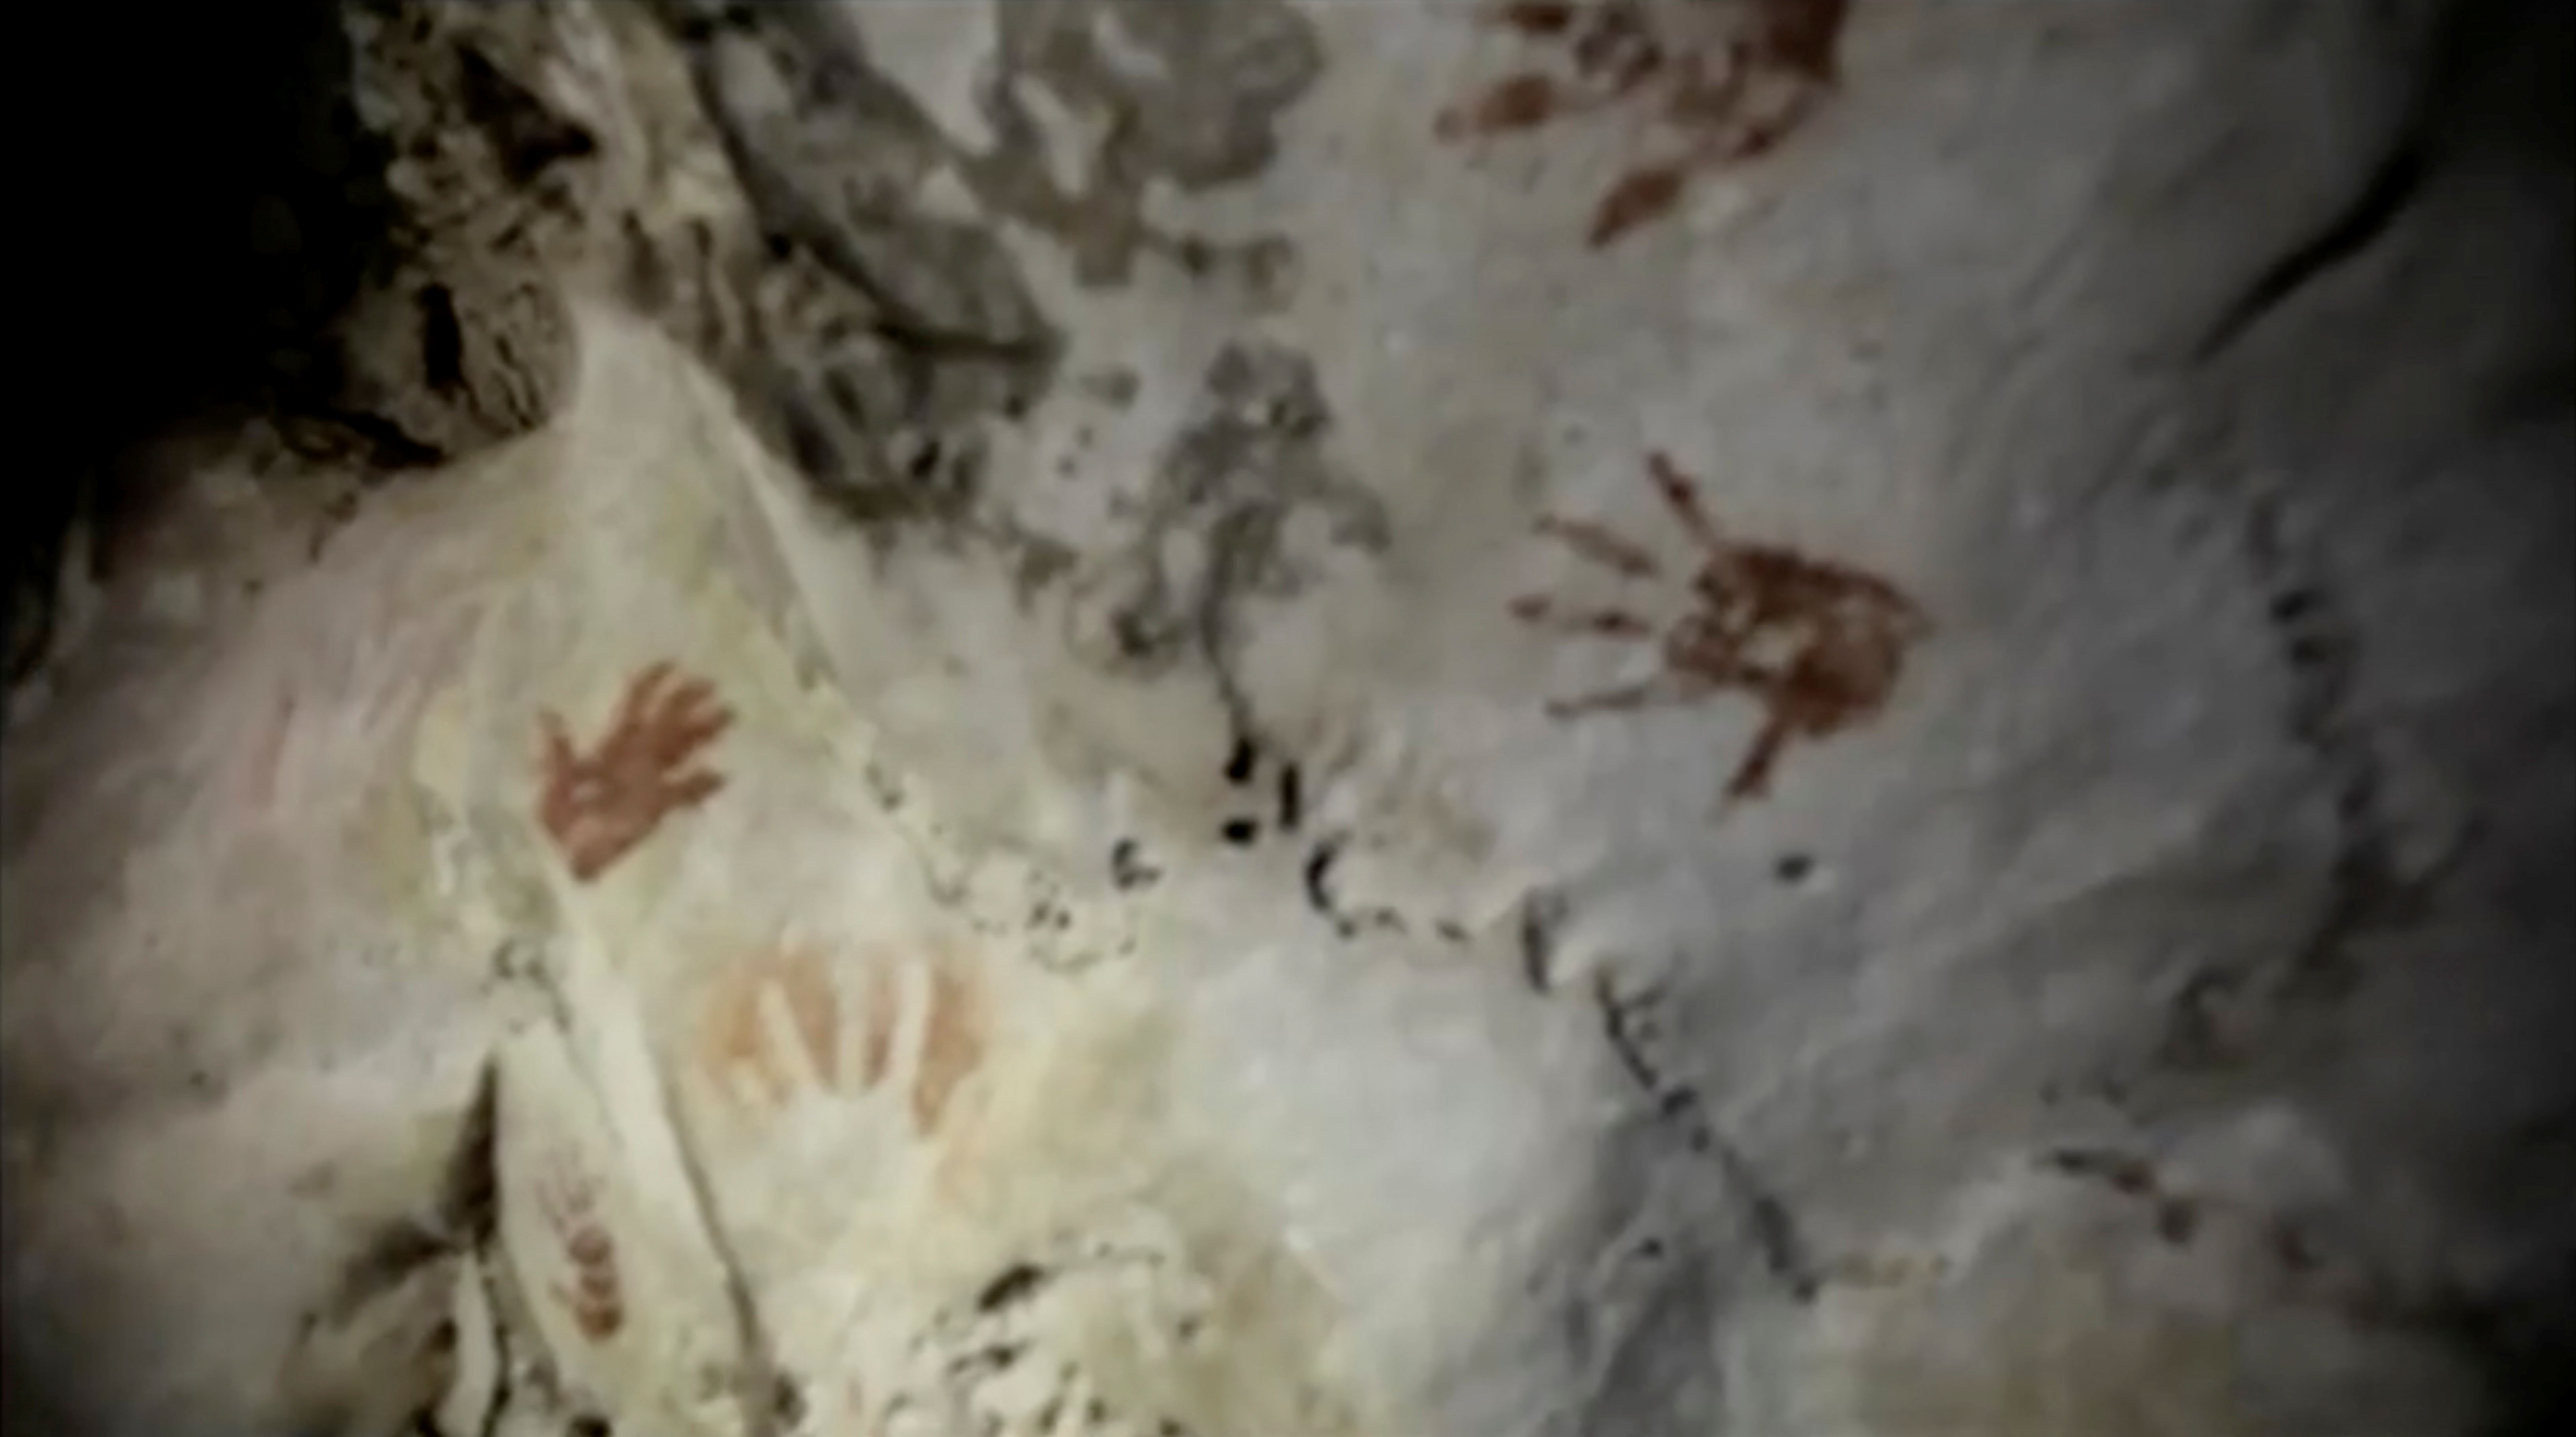 Hand prints, reportedly 1,200 years old, are seen on the cave walls, in Merida